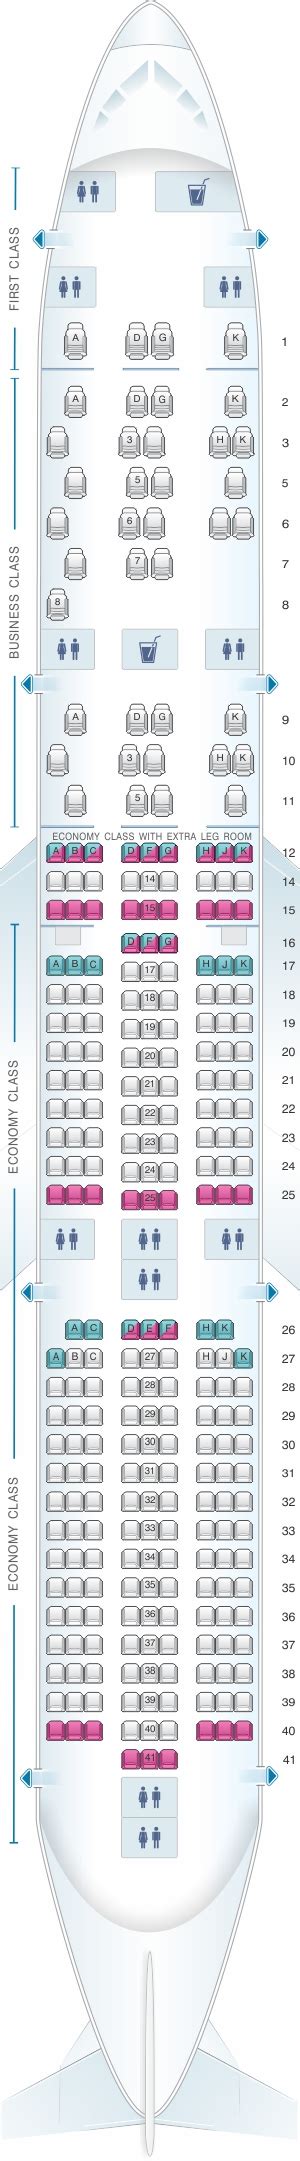 Seat Map Malaysia Airlines Boeing B737 800 166pax Seatmaestro Porn